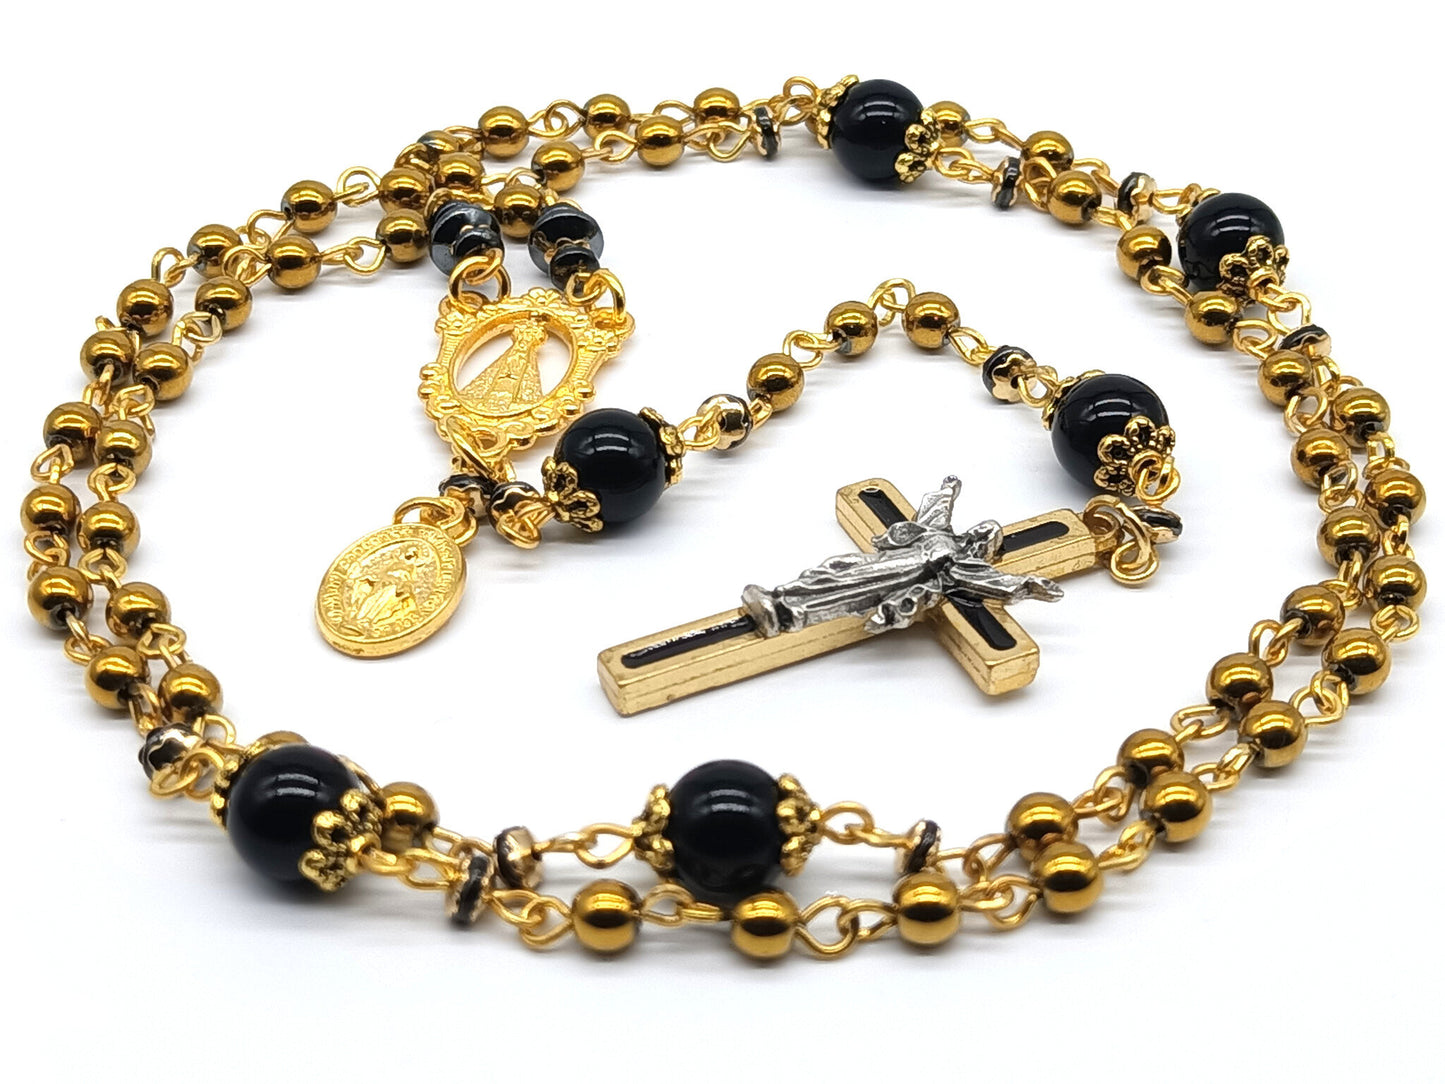 Our lady of Loretto unique rosary beads with gold hematite and onyx gemstone beads, gold and black enamel crucifix, medals and bead caps.